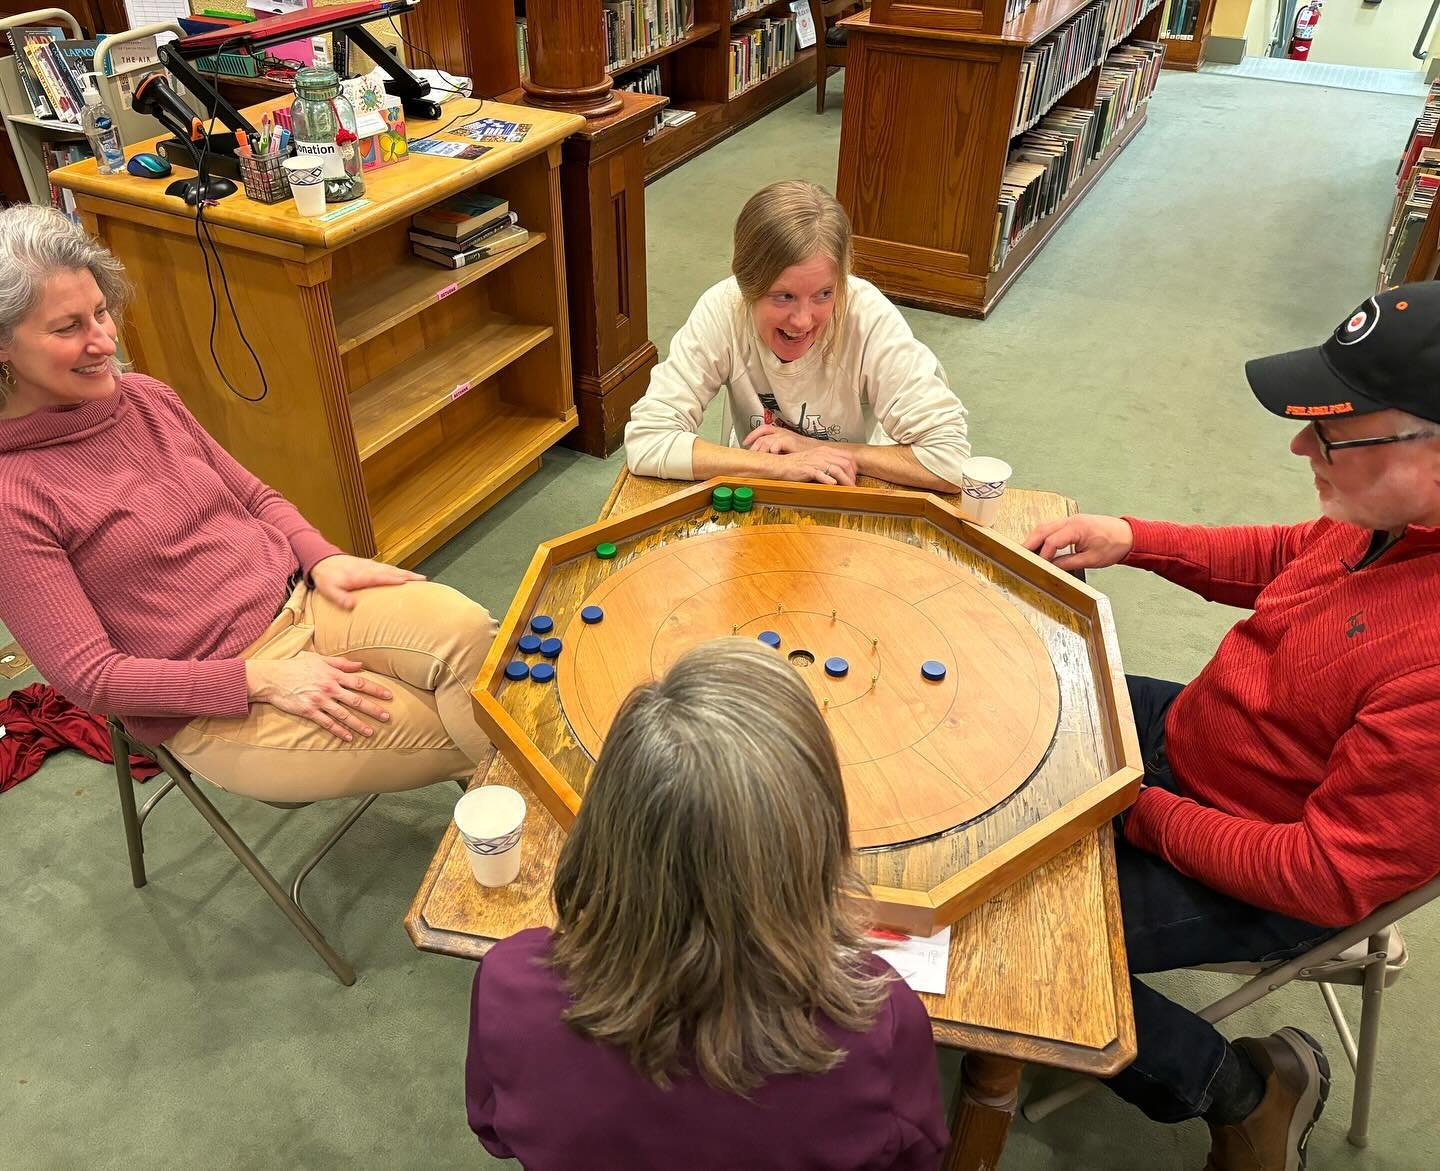 Plenty of fun was had at our special Crokinole game night. Thanks to everyone who came out to play!

Want to get on the fun? Join our fabulous volunteer Mark Gibson at the library on March 20th at 6:15 pm for our next game night.